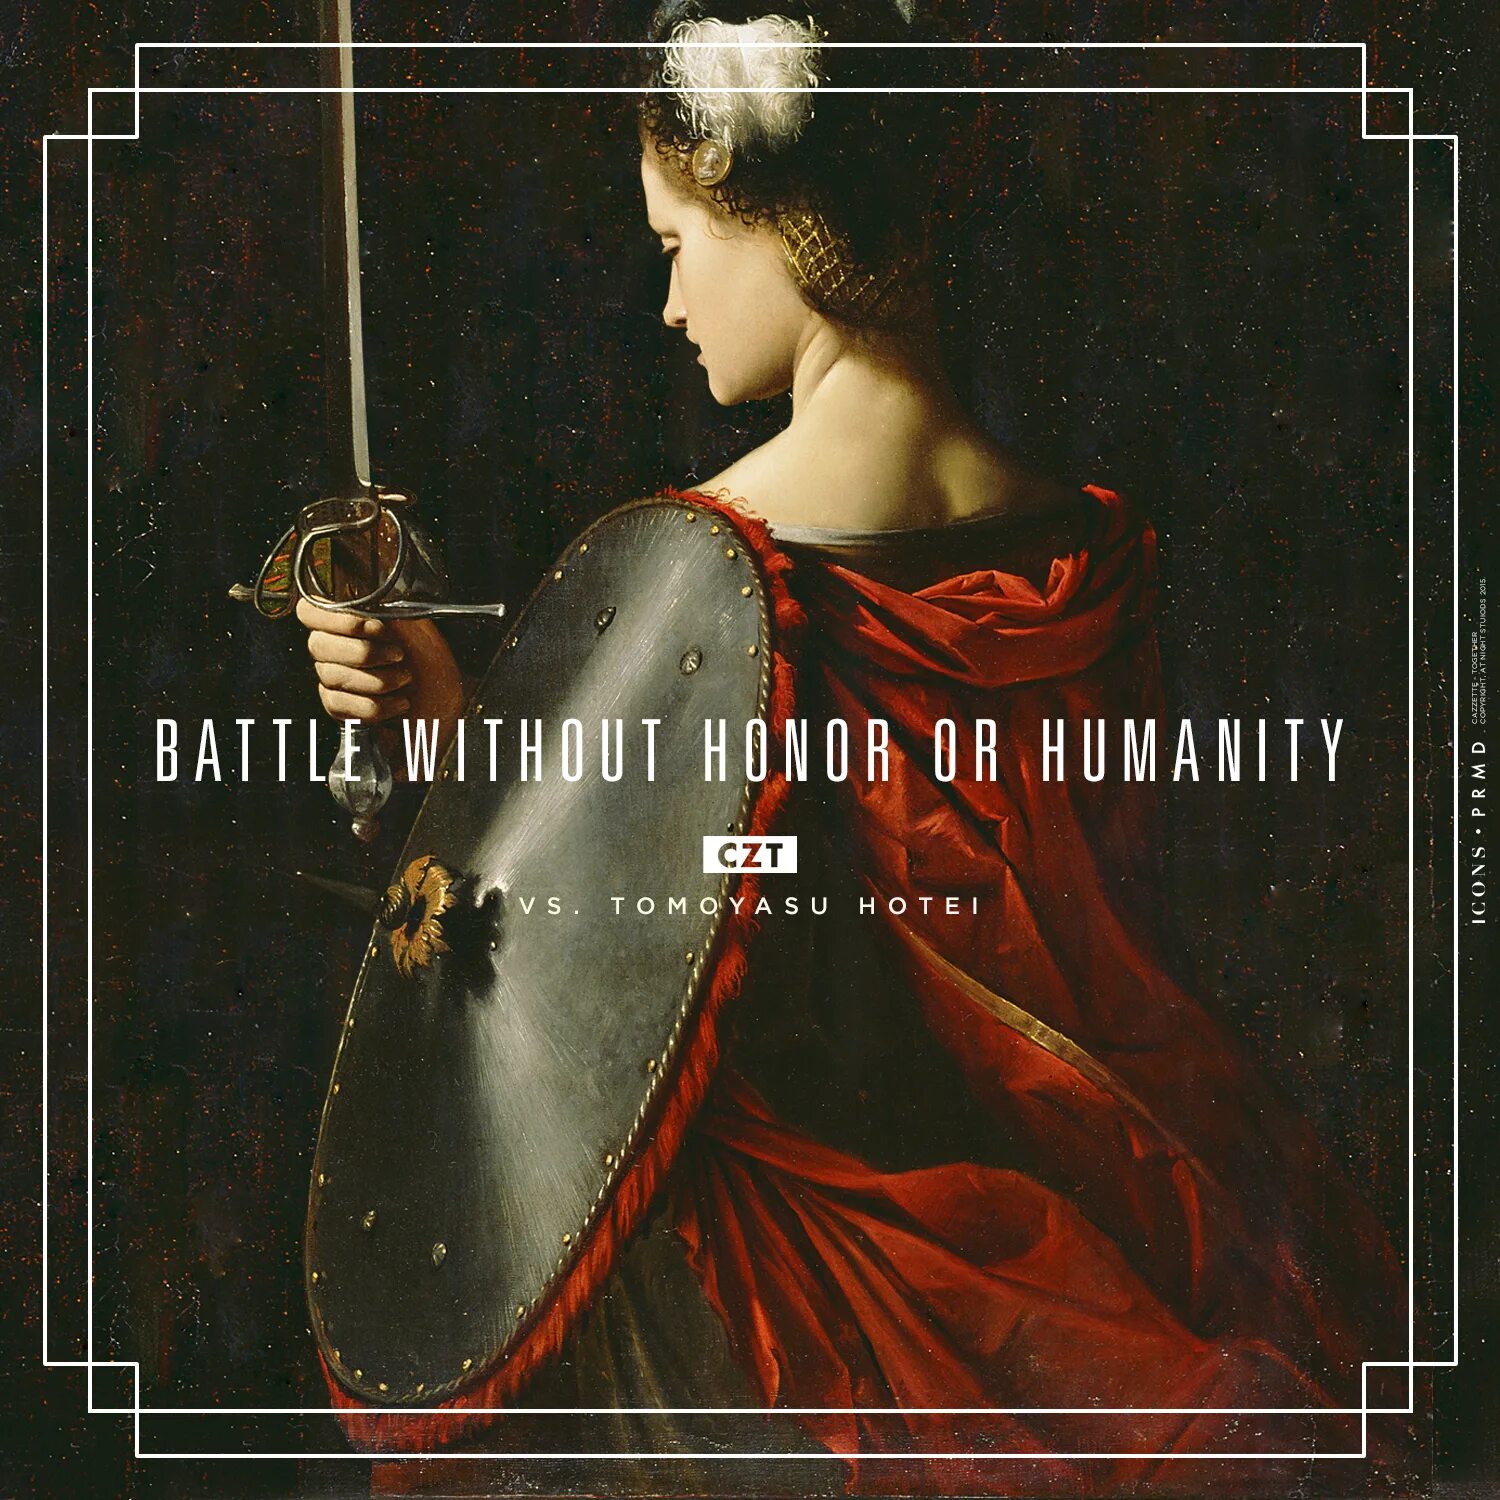 Without honor or humanity. Tomoyasu Hotei Battle without Honor or Humanity. Tomoyasu Hotei Battle without Honor. Battle without Honor or Humanity. Battle without Honor.